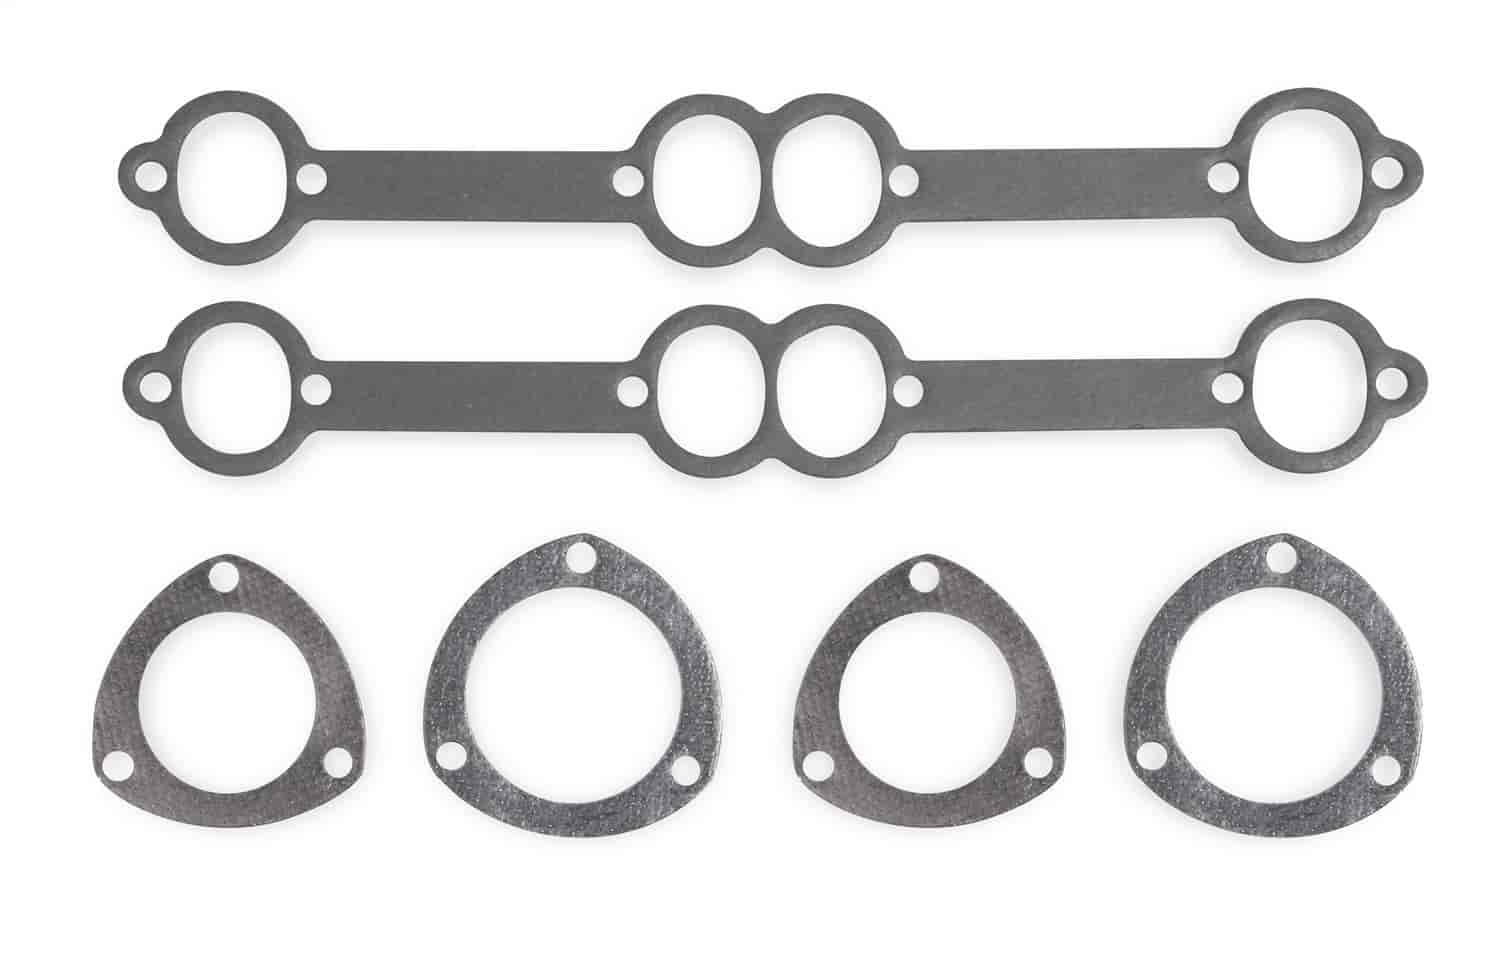 Header Replacement Gasket Set Small Block Chevy Flowtech Full Length Headers Includes 2.5" and 3" Collector Gaskets in Pairs